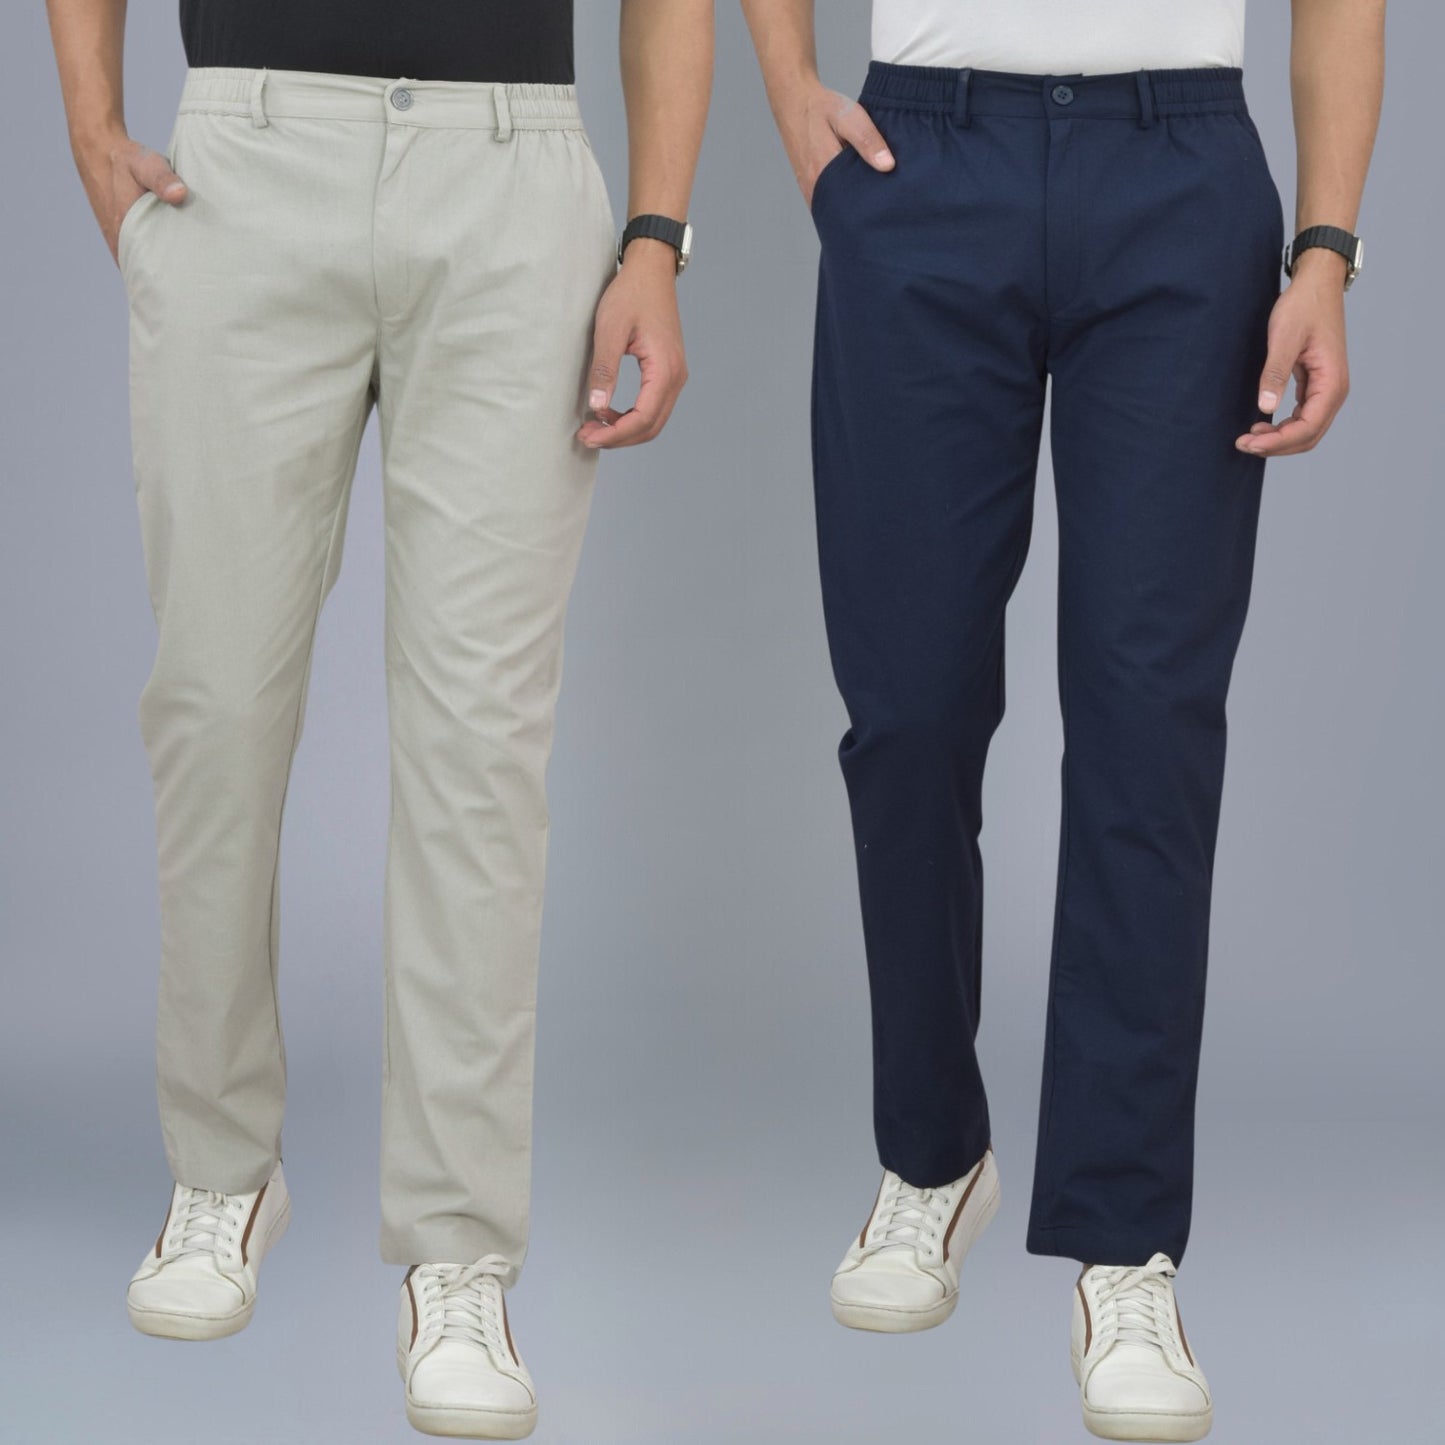 Pack Of 2 Melange Grey And Navy Blue Airy Linen Summer Cool Cotton Comfort Pants For Men